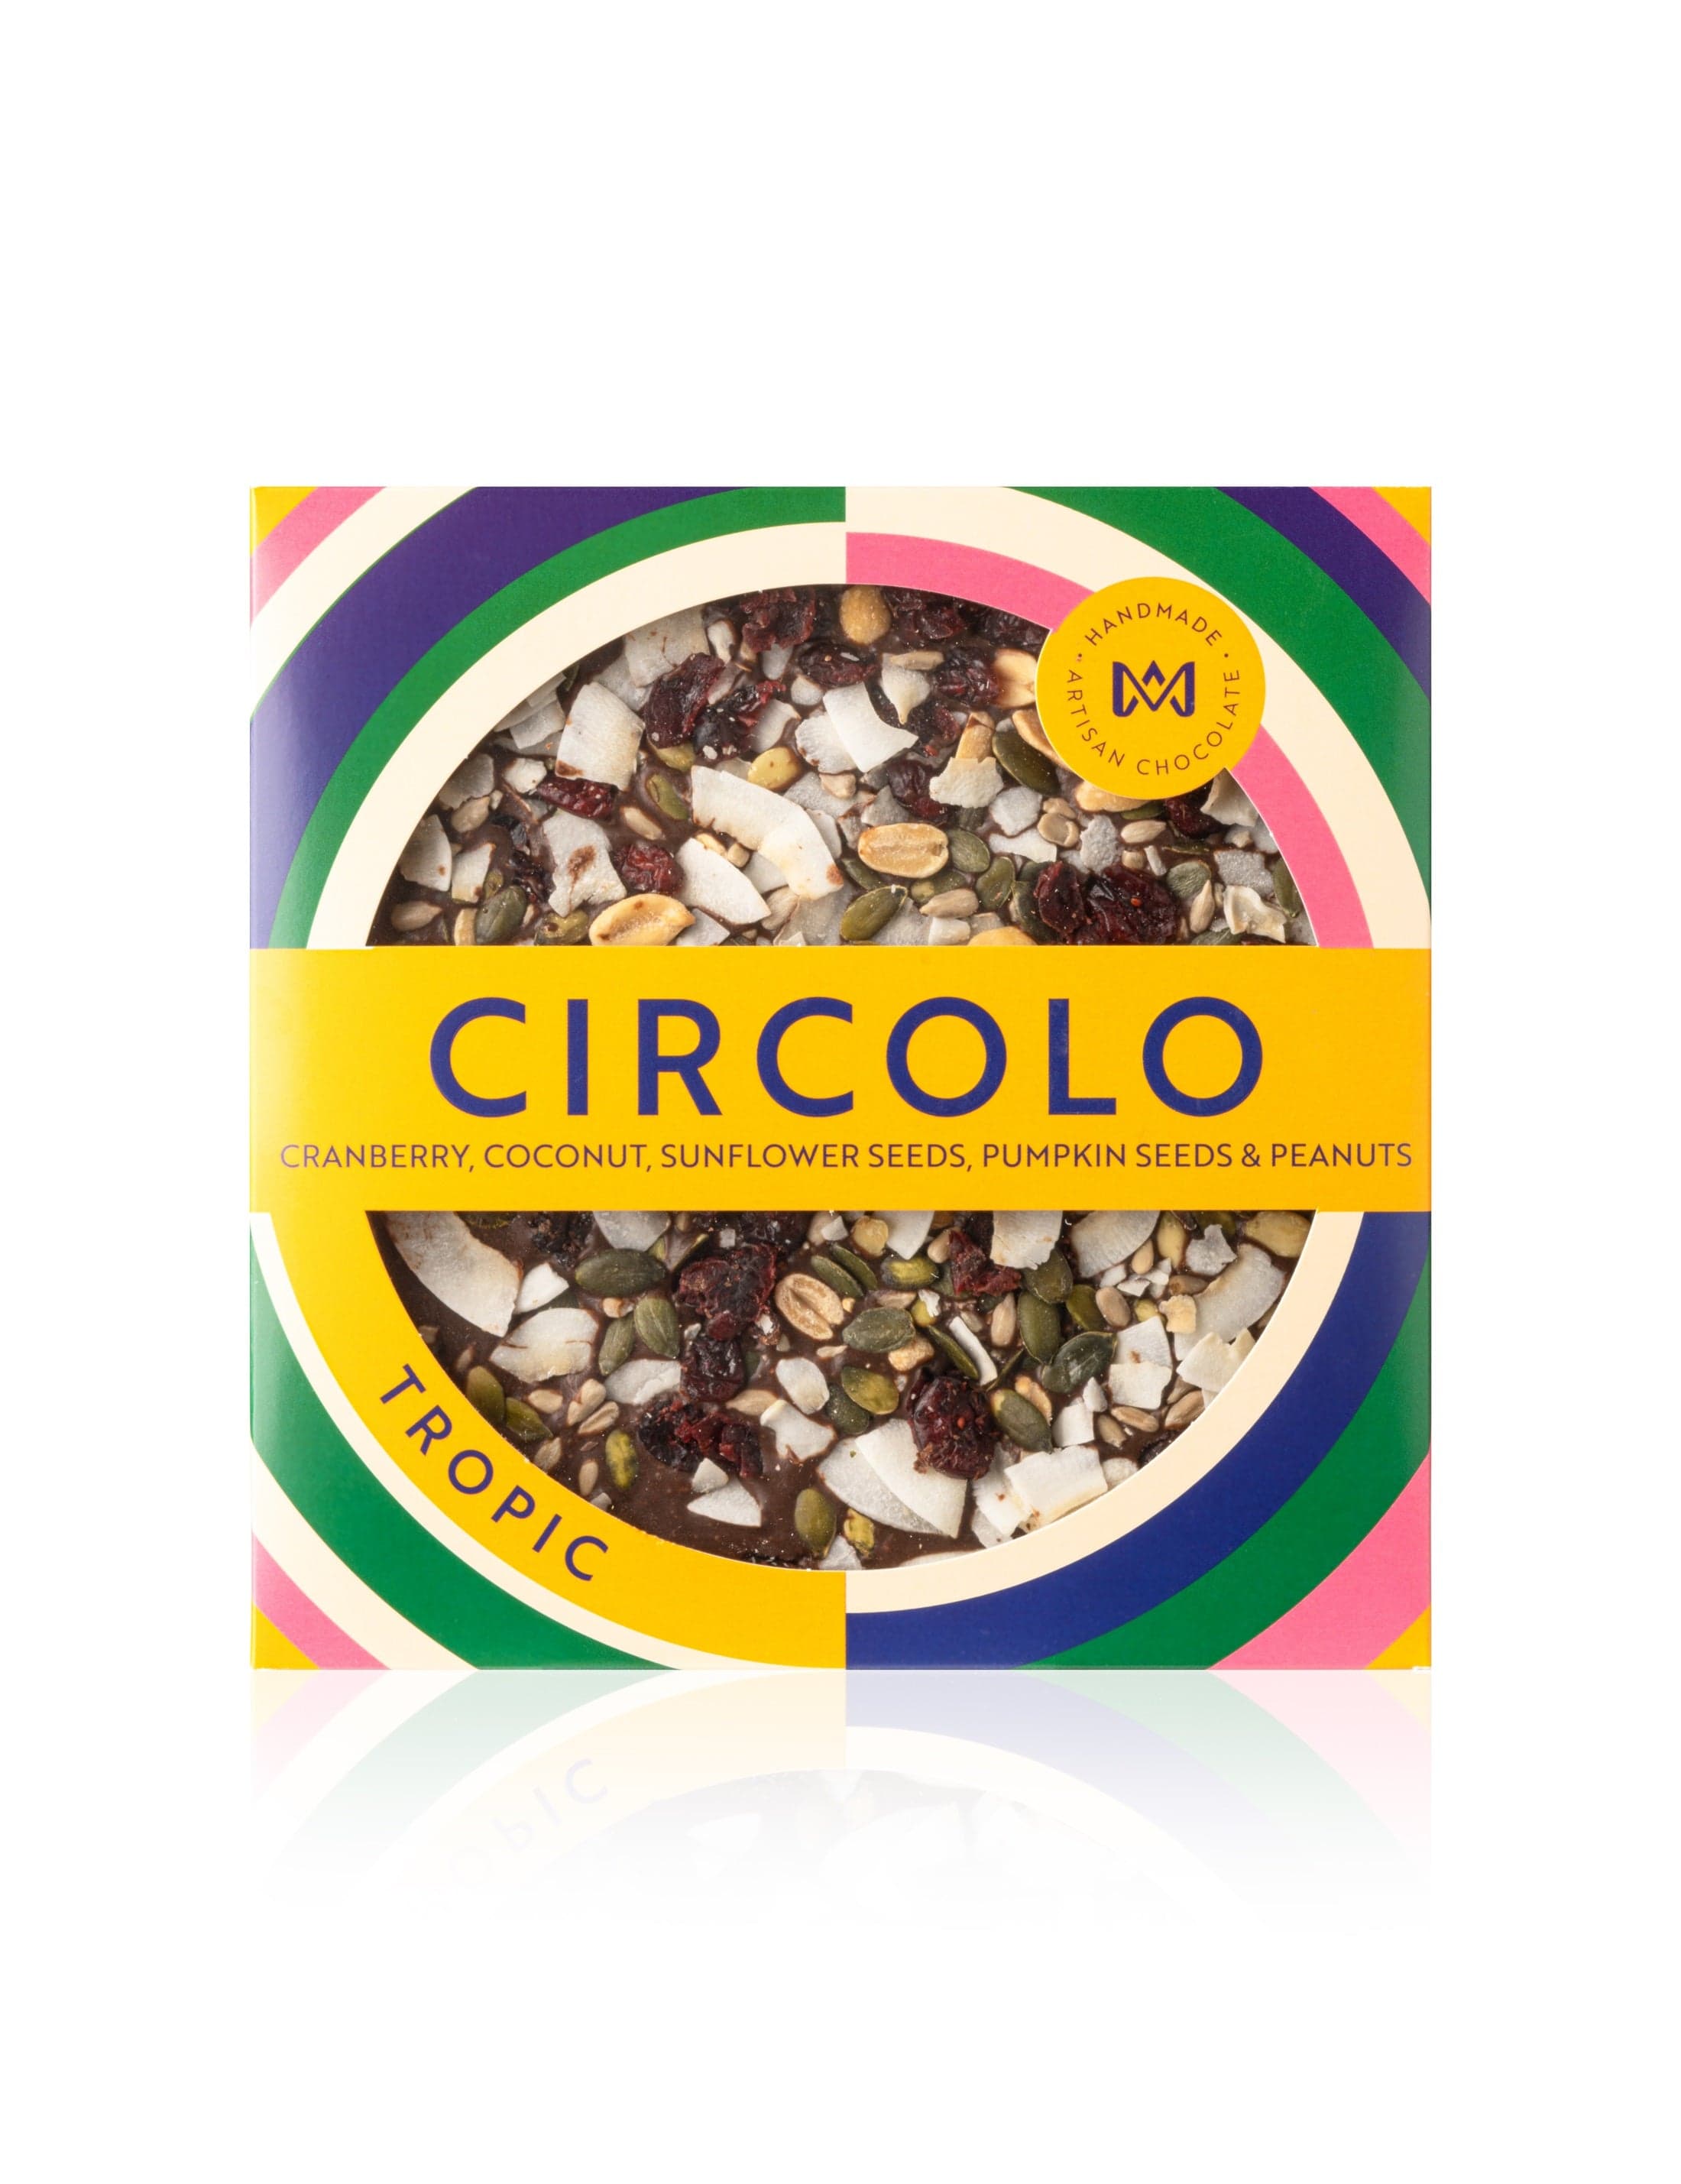 Circolo Asiatic - Handcrafted Confection - The Icelandic Store